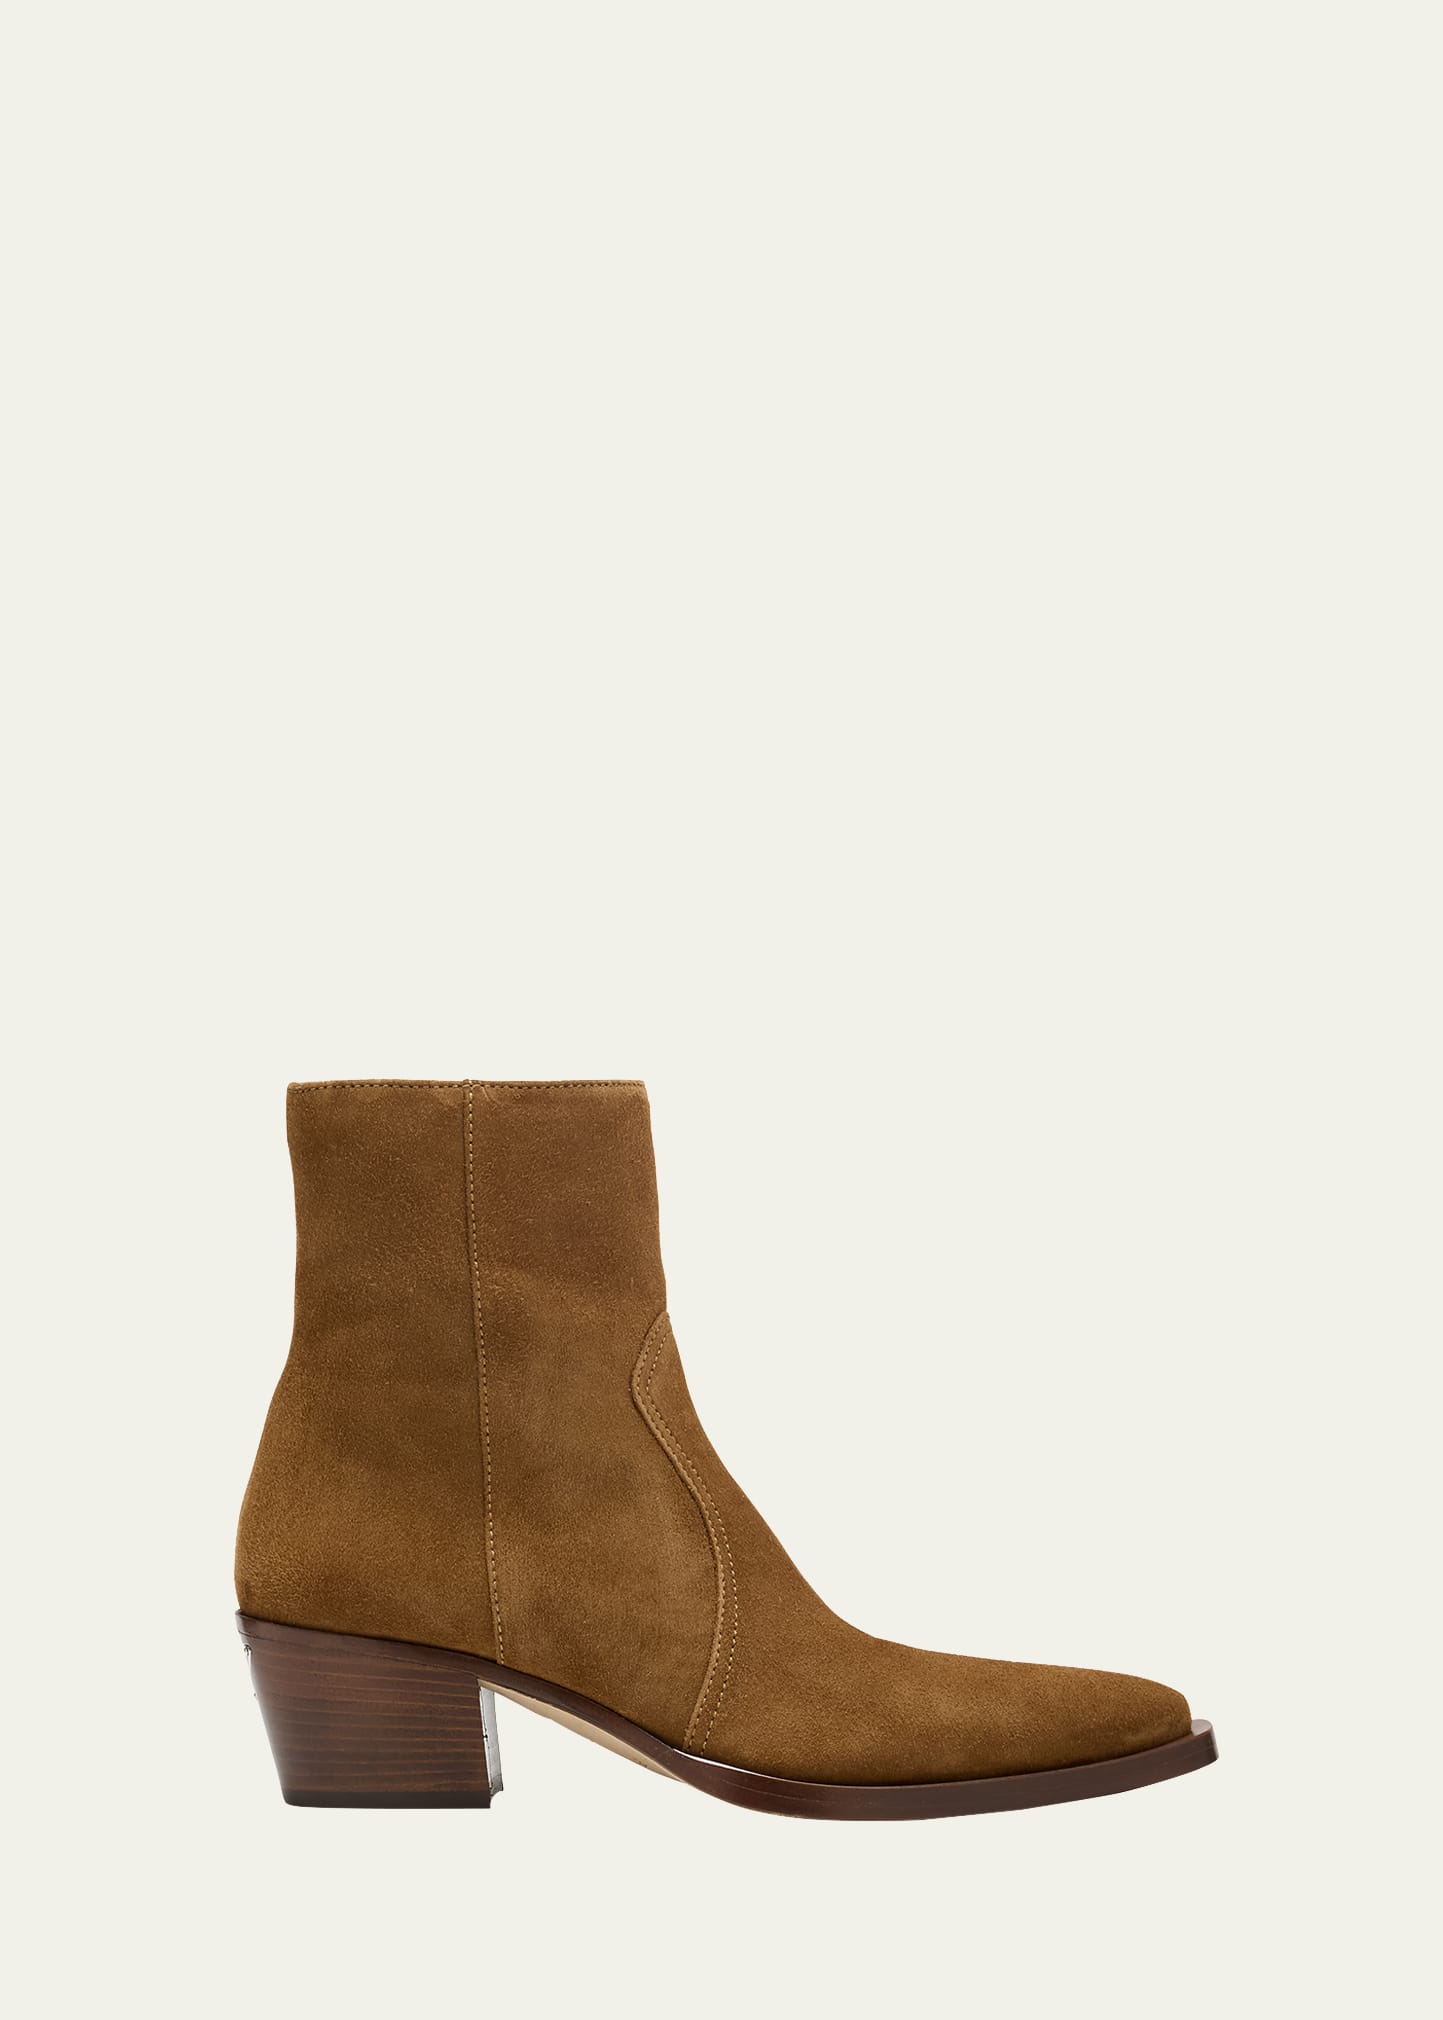 Prada Suede Zip Ankle Boots In Brown